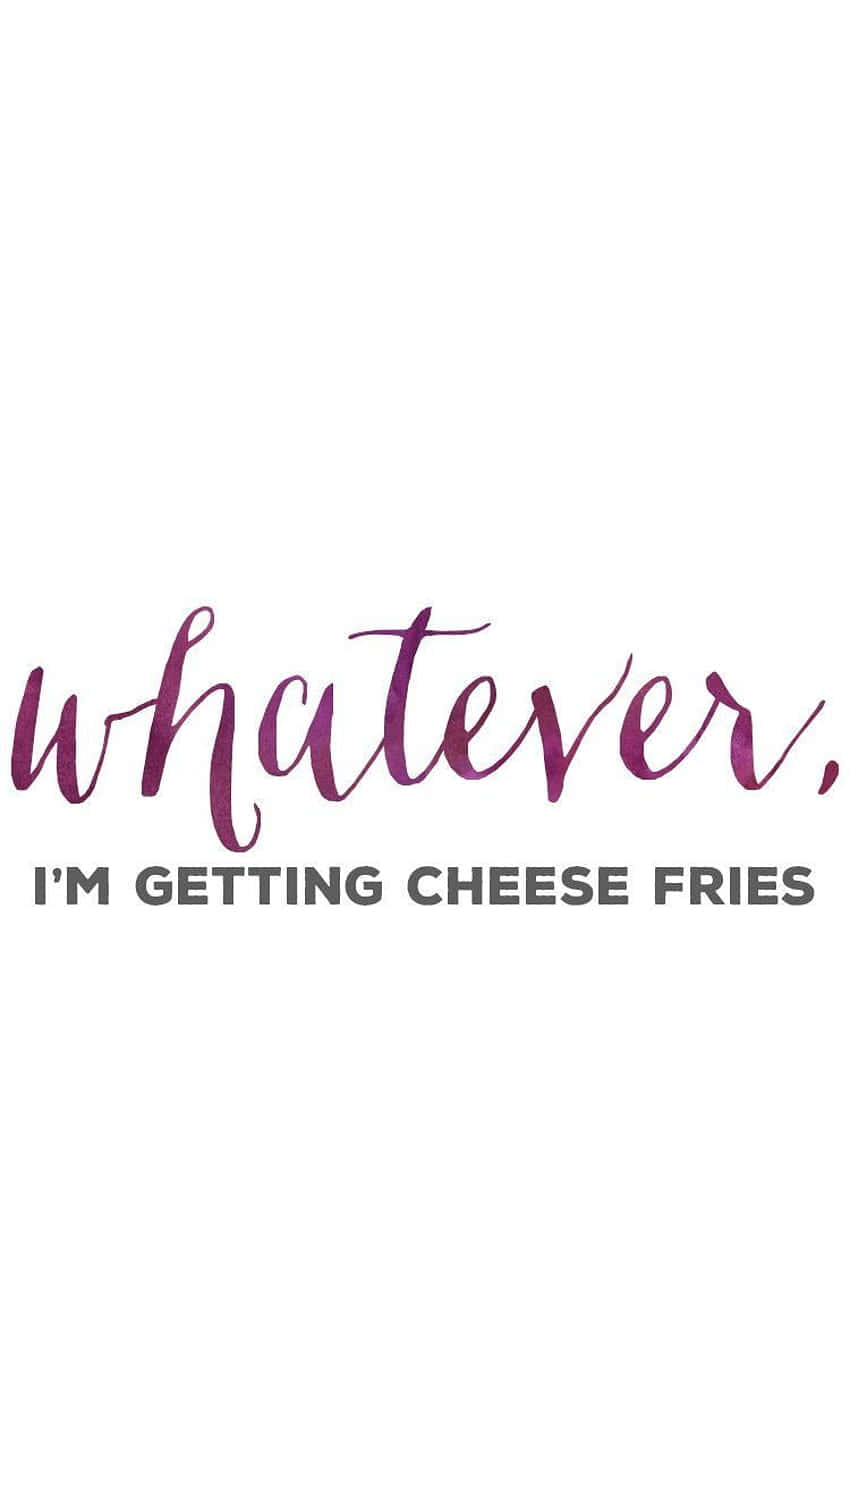 Whatever I'm Getting Cheese Fries Logo Wallpaper